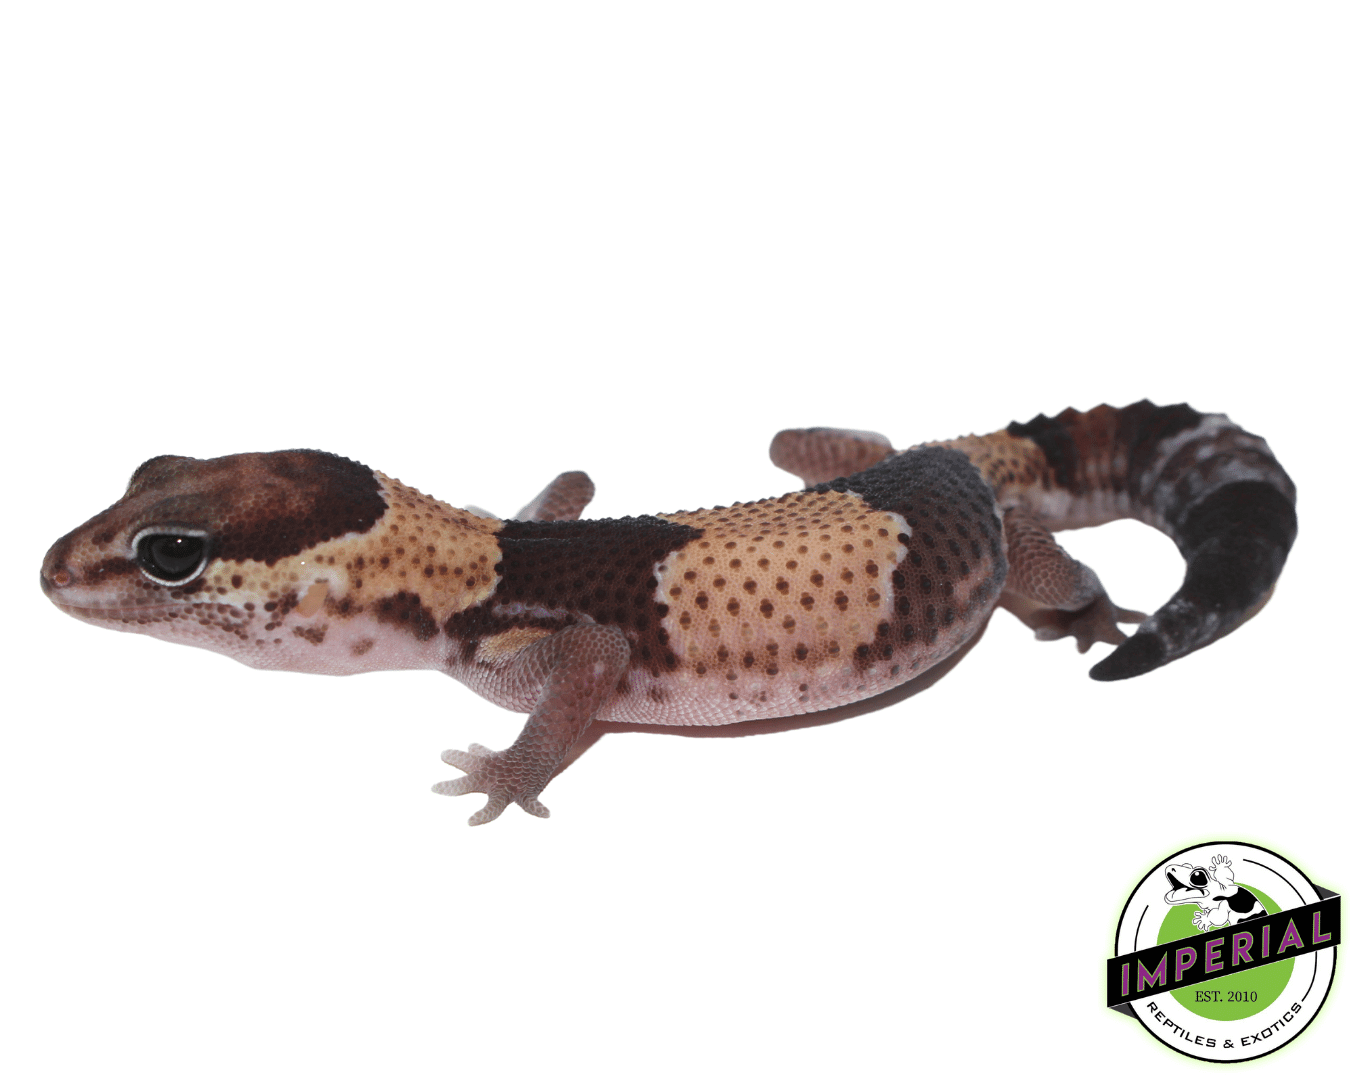 Tangerine ph Amel Oreo African Fat Tail gecko for sale, buy reptiles online